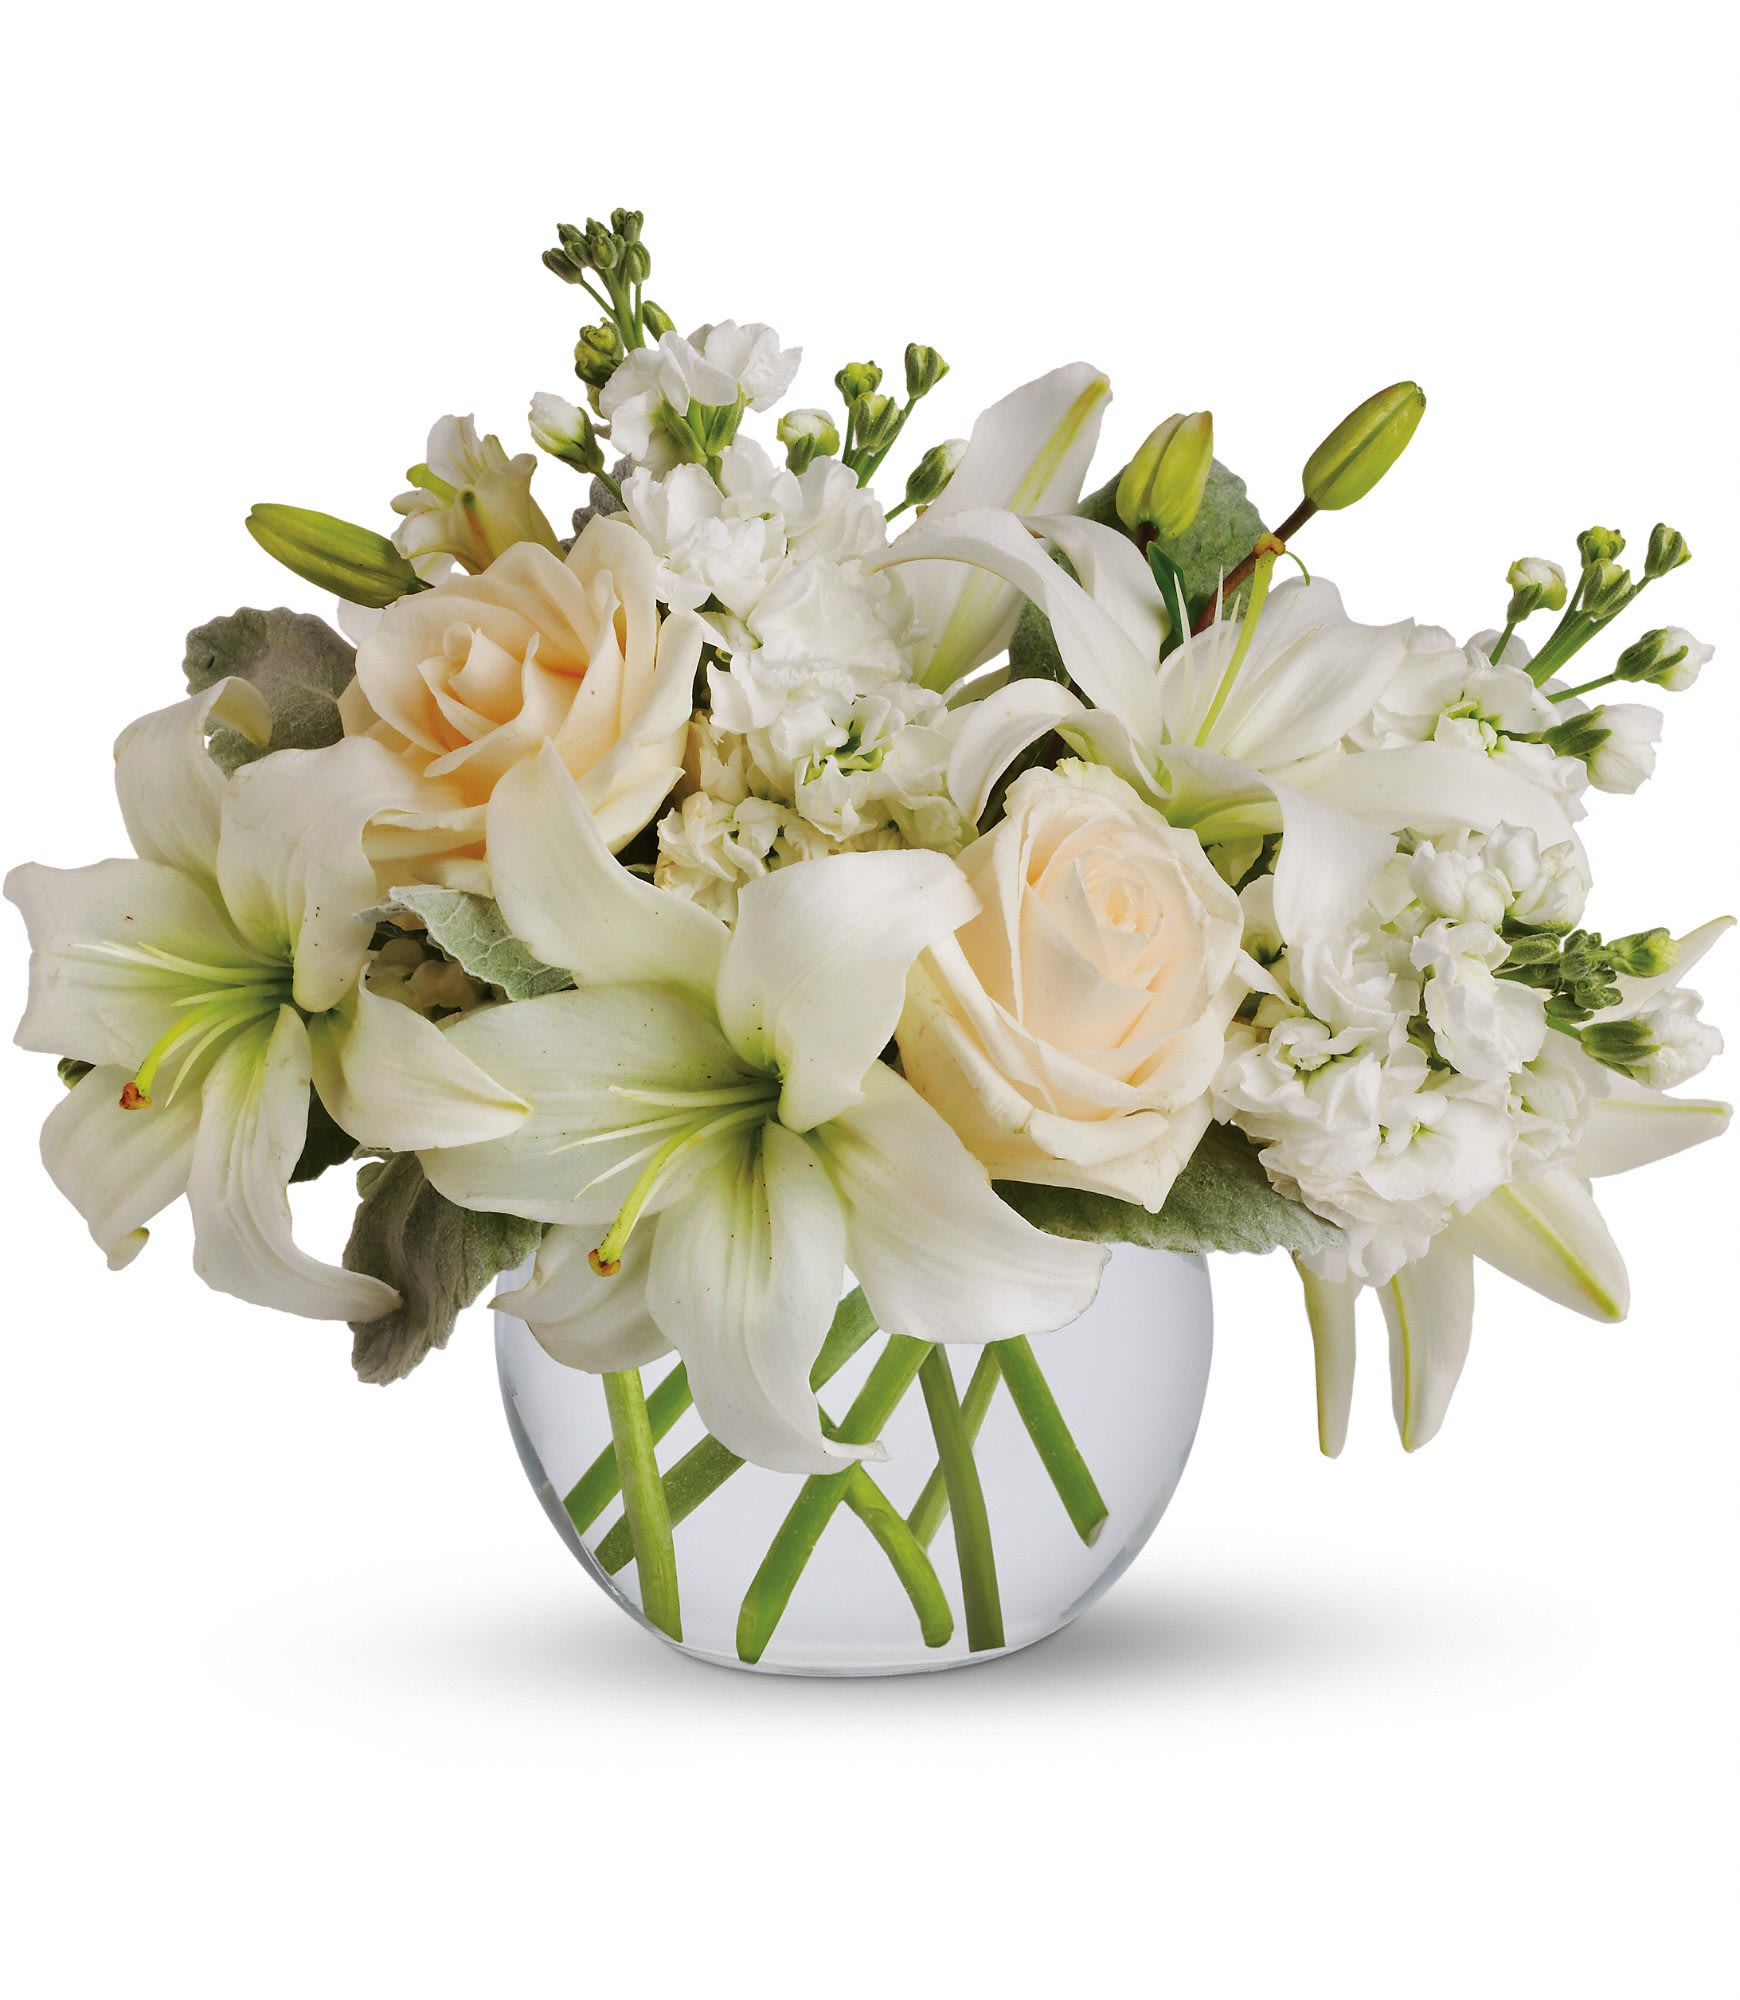 Isle of White  - Like a vacation for the senses, this lovely bouquet delivers an oasis of beauty and elegance. Soothing, serene and very special.